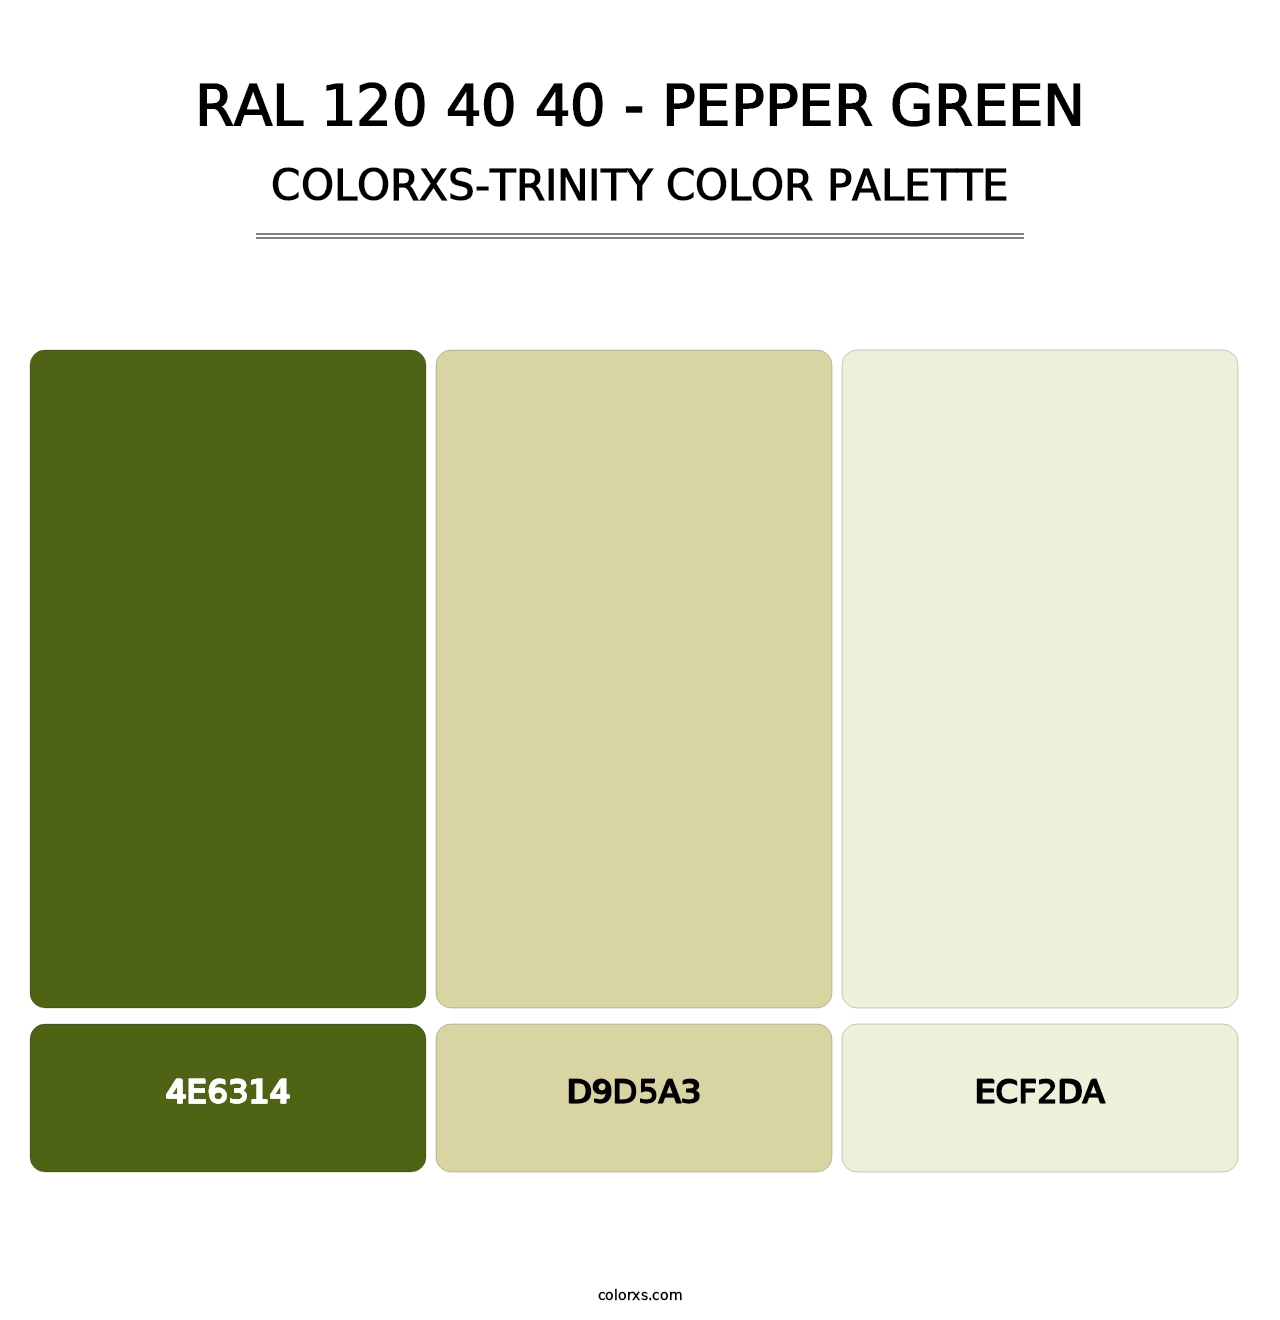 RAL 120 40 40 - Pepper Green - Colorxs Trinity Palette